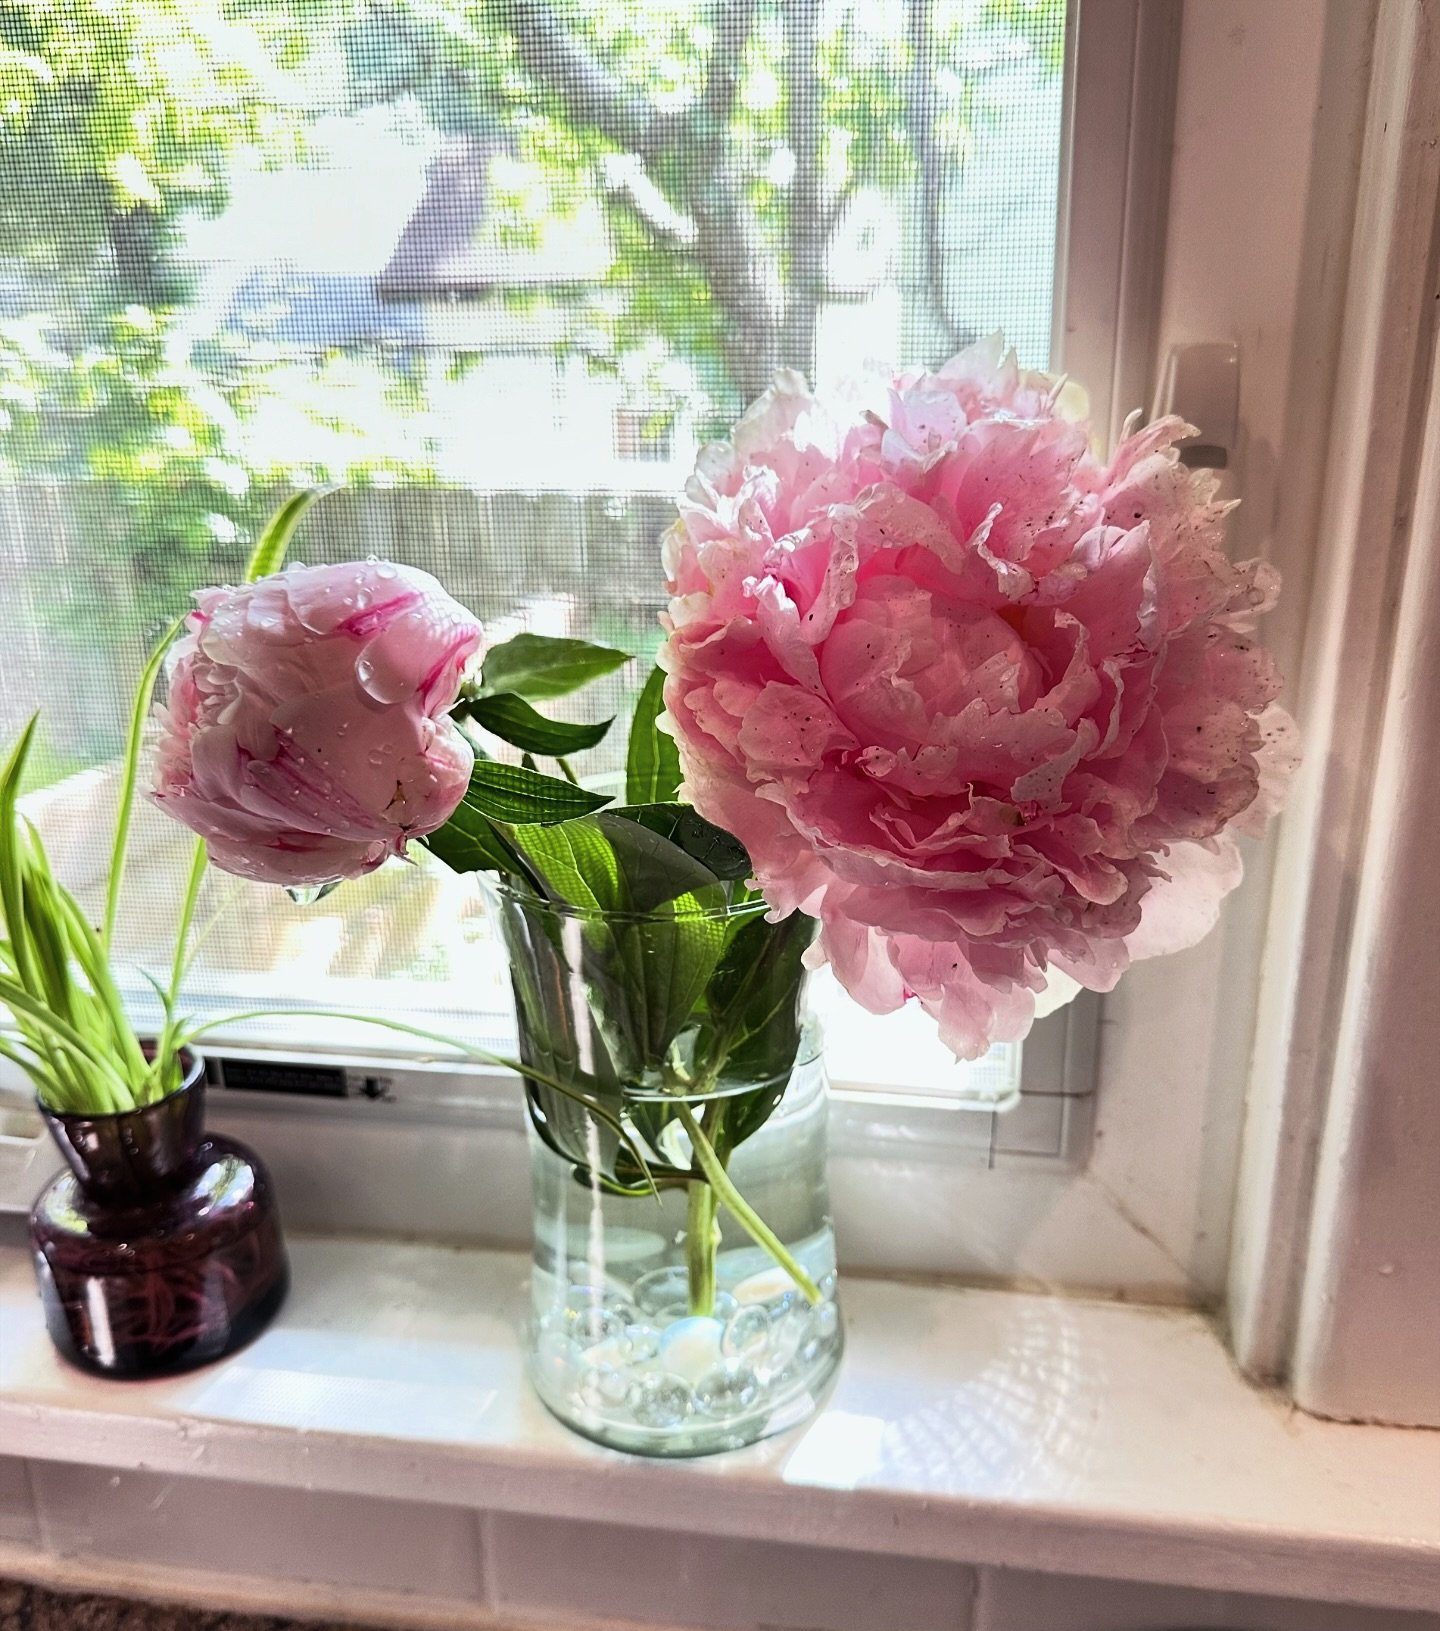 Tip for reclaiming your peace: Bring nature inside and place it where you can see it 🌸💕 These beauties are giving me a reminder to slow down and breathe. These tiny moments of pause are enough to change the trajectory of your whole day. Tell us in 